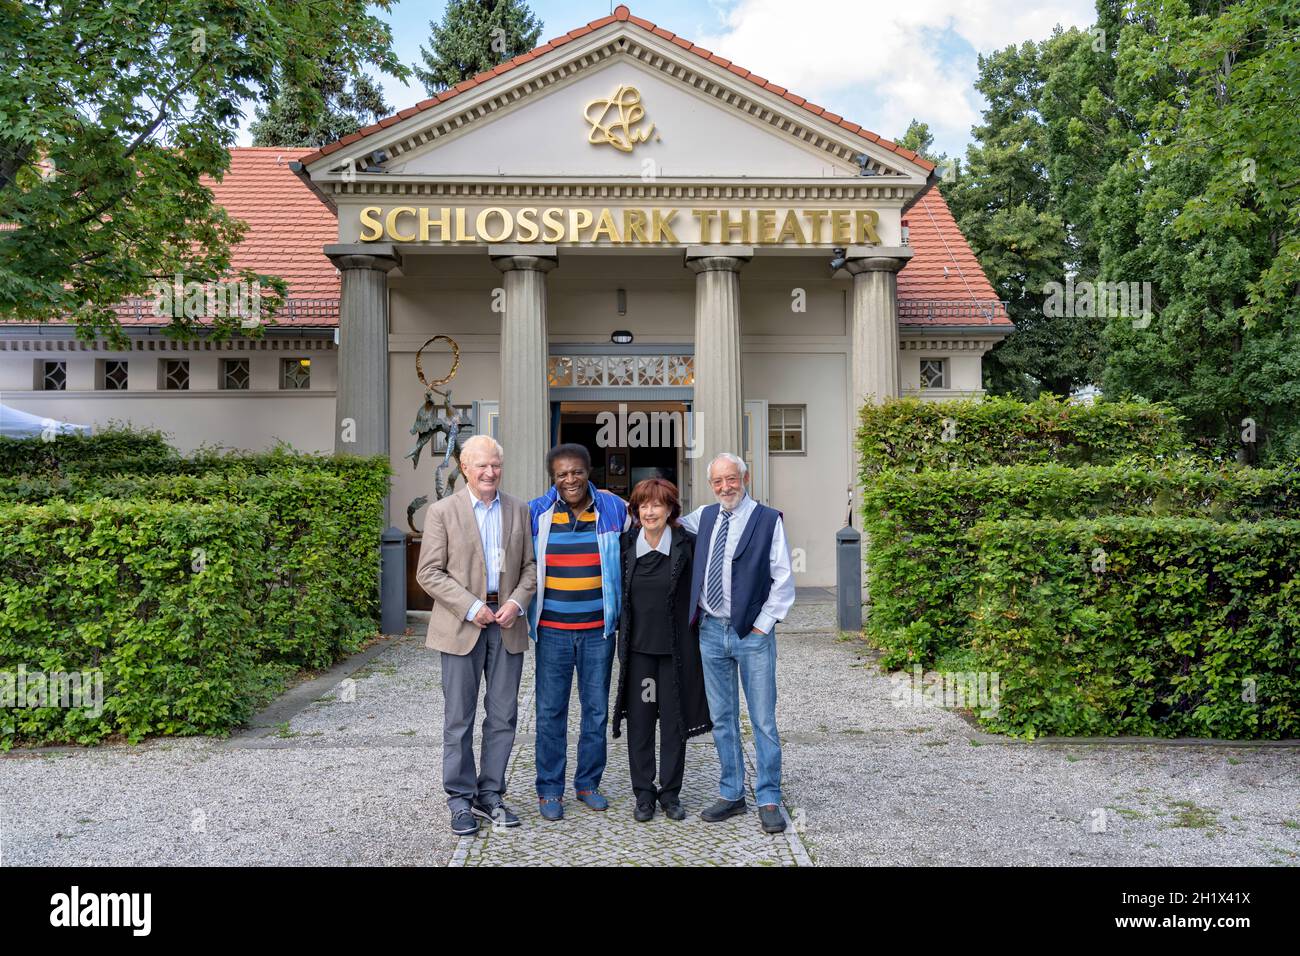 Peter Bause, Roberto Blanco, Brigitte Grothum, Dieter Hallervorden at the annual press conference at the Schlosspark Theater in Berlin. Stock Photo